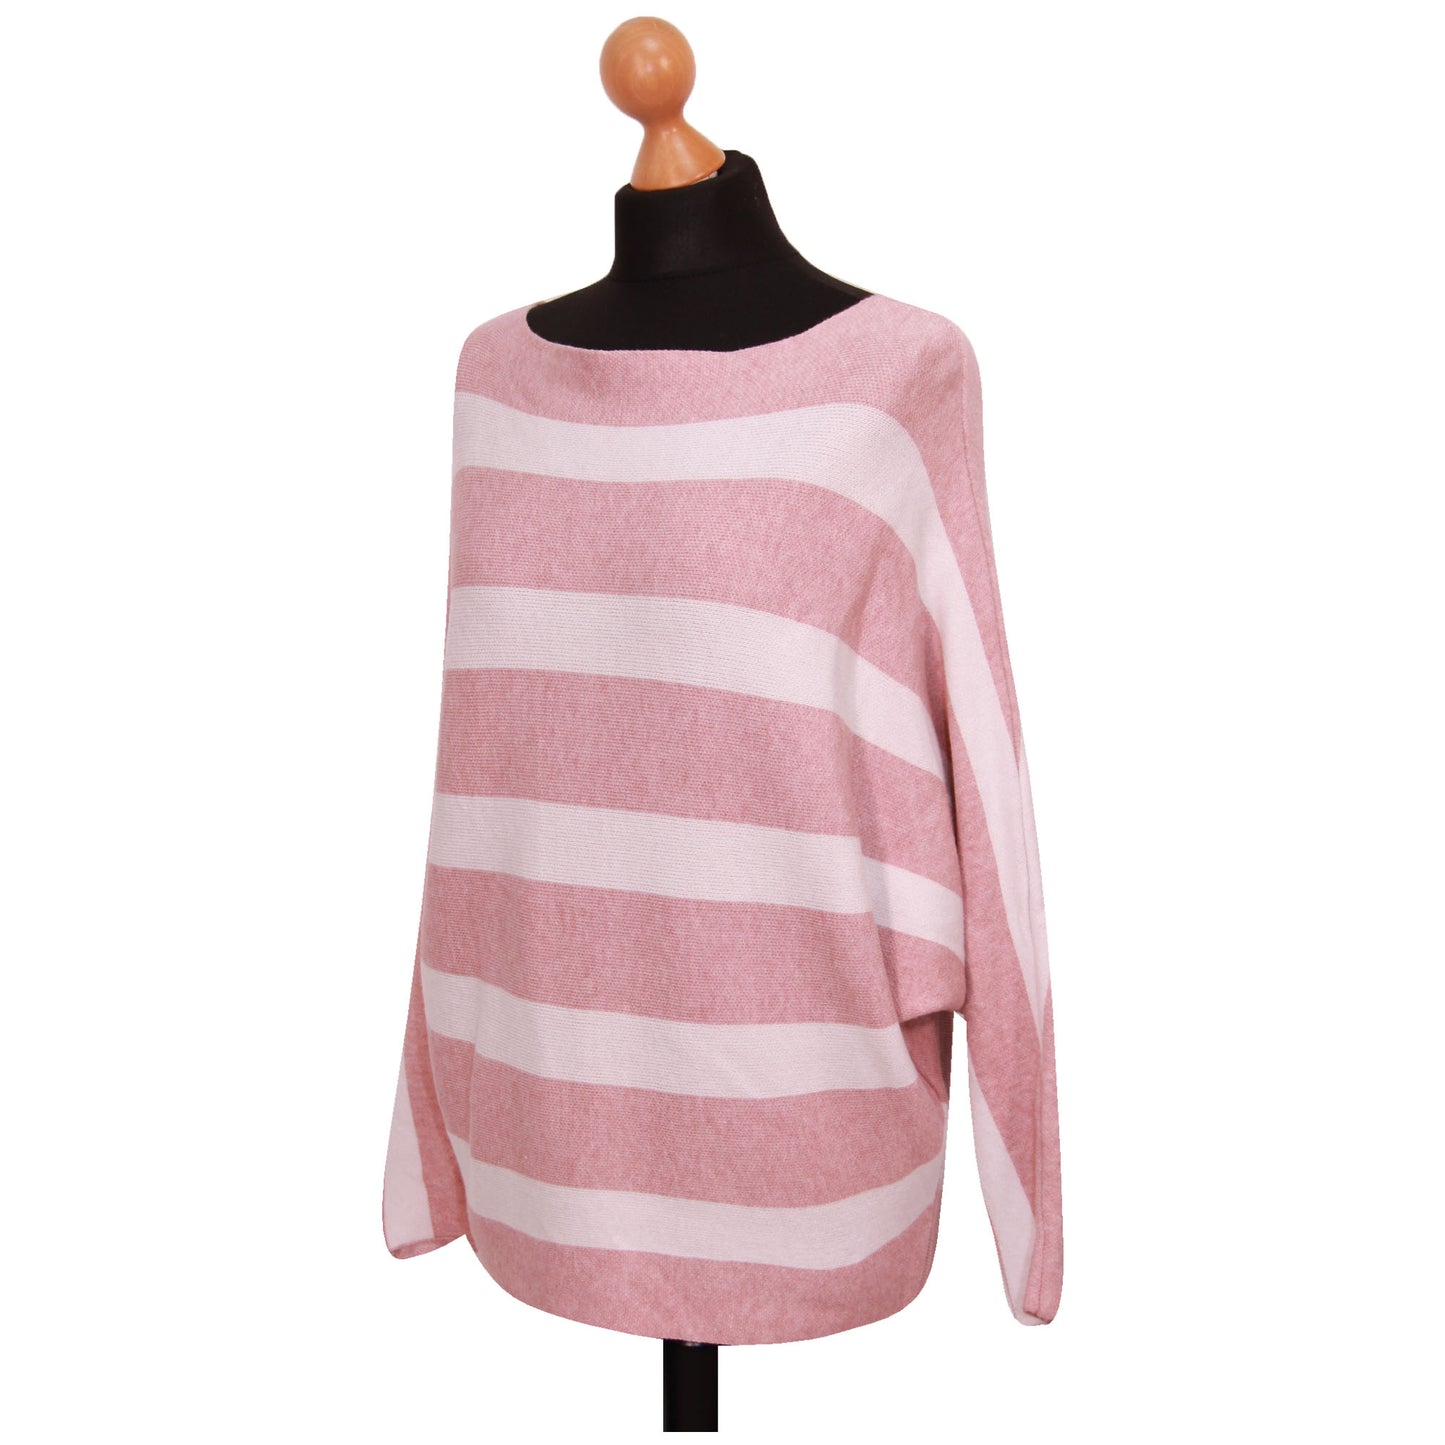 CozyChic Striped Women's Winter Jumper – Perfect Gift for Her